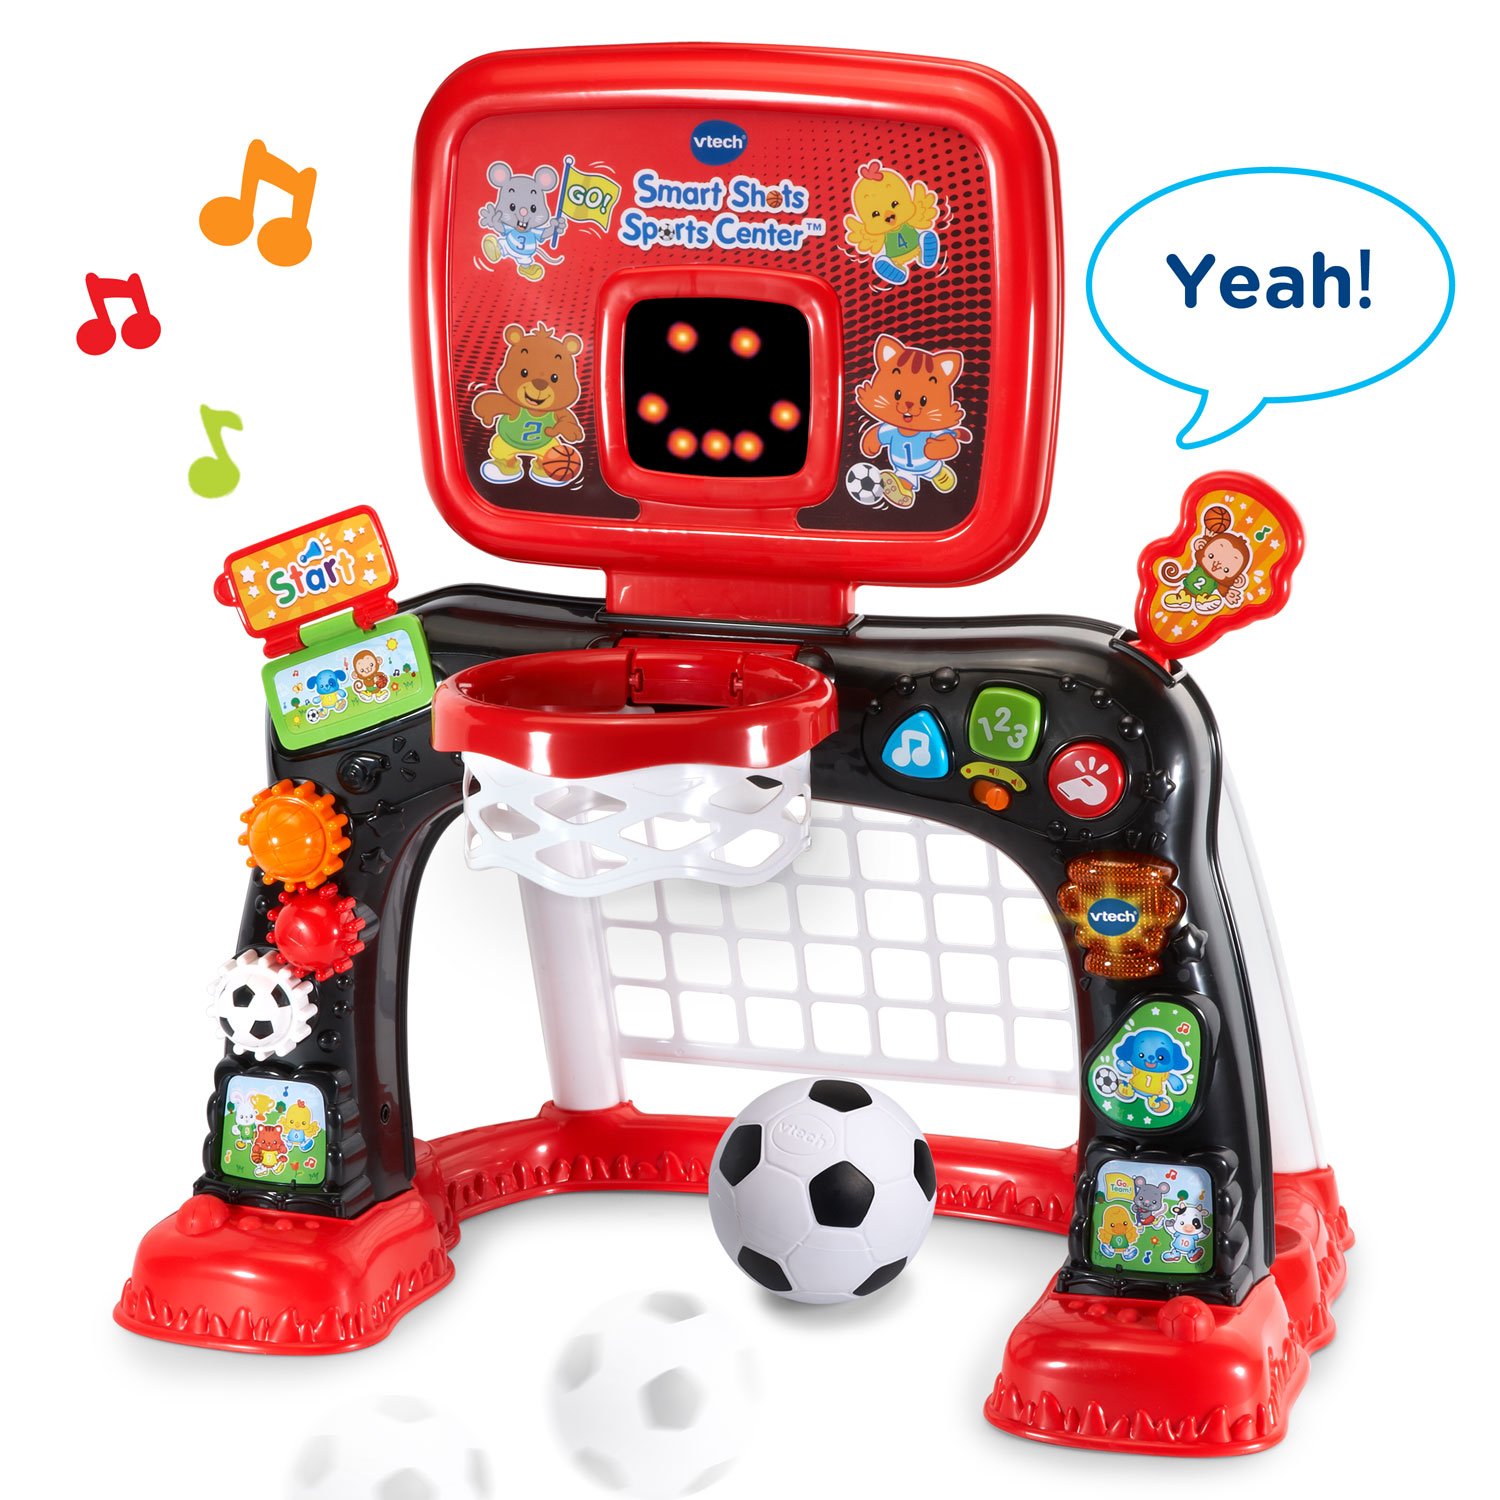 VTech Smart Shots Sports Center Amazon Exclusive (Frustration Free Packaging), Plastic